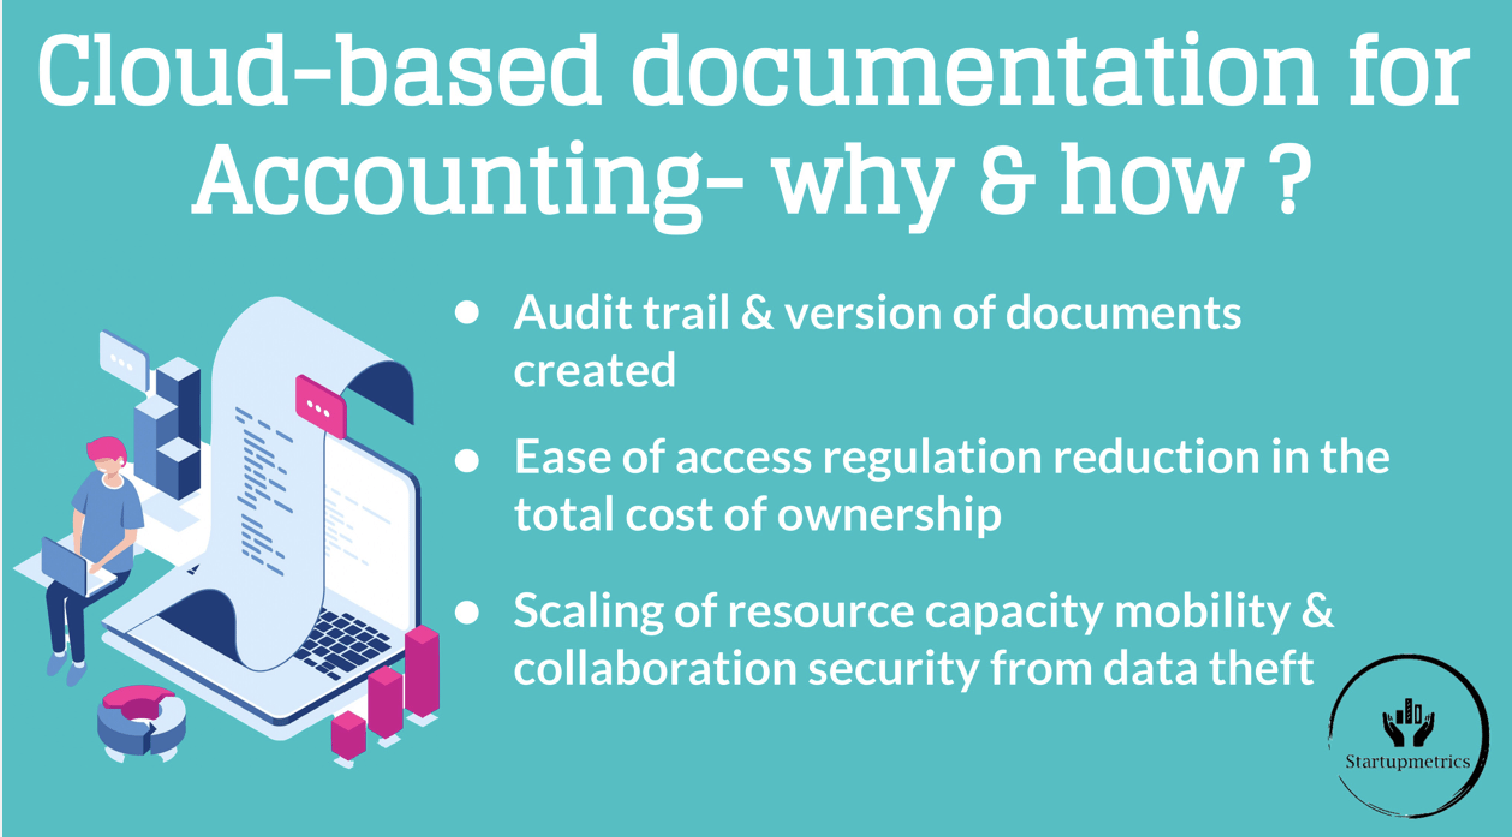 Cloud-based documentation for accounting-why & how?